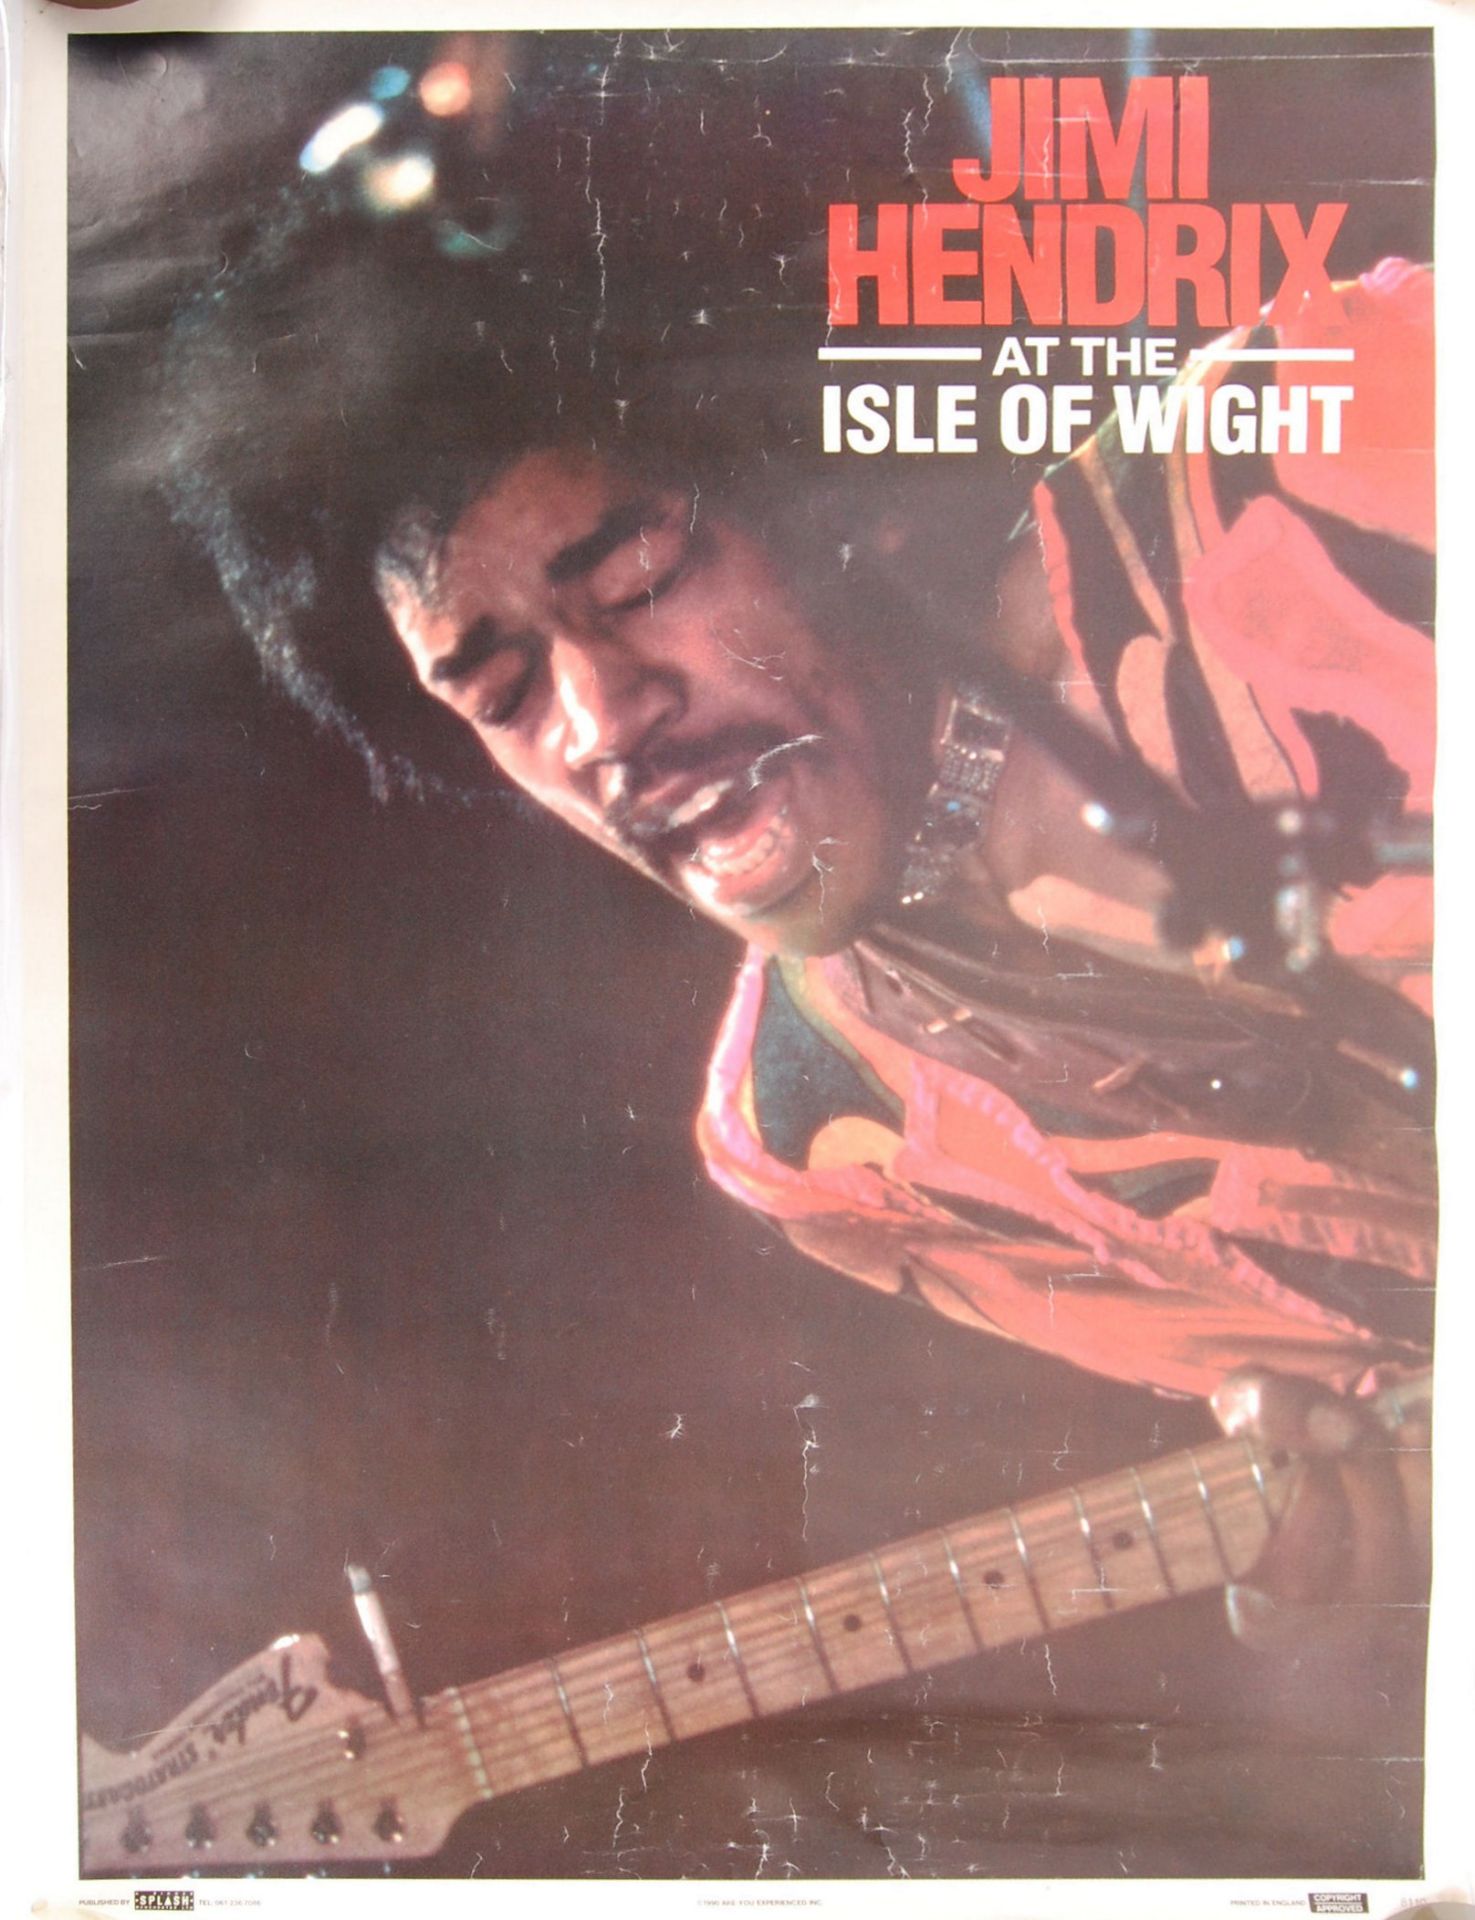 VINTAGE JIMI HENDRIX AT THE ISLE OF WIGHT POSTER